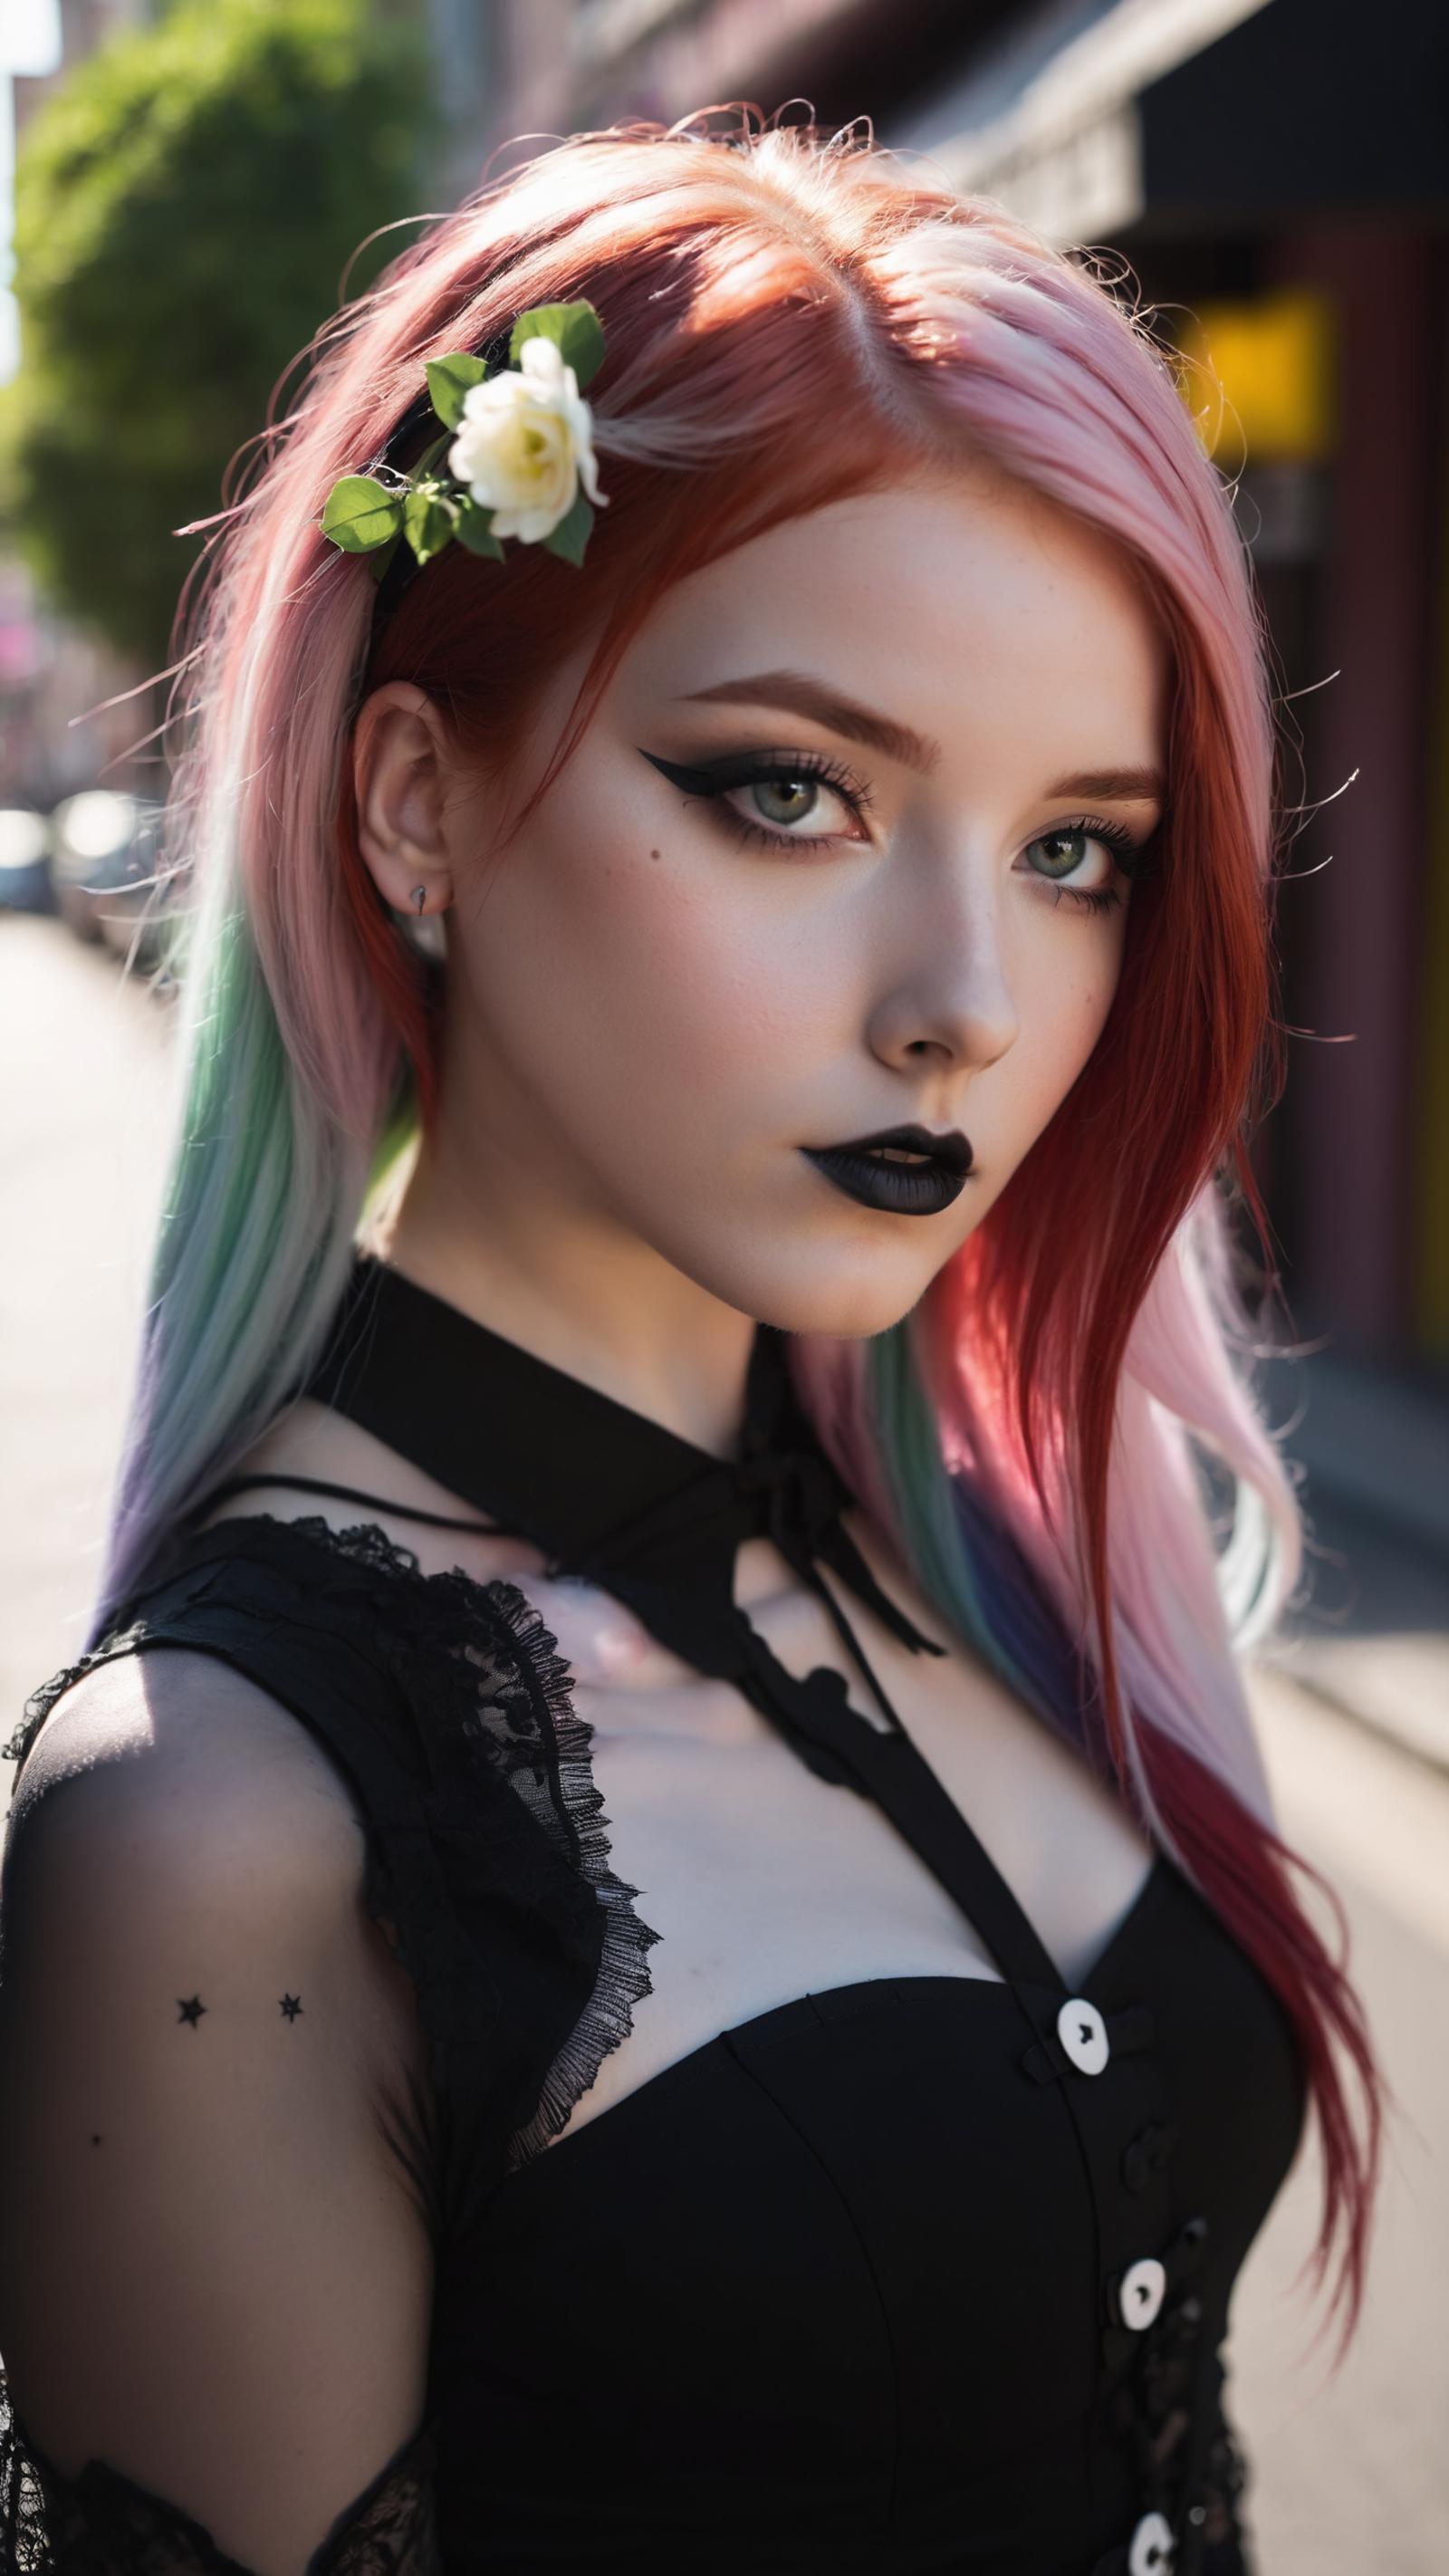 A young woman with vibrant red hair and a black lipstick, wearing a black lace top and a white flower in her hair.